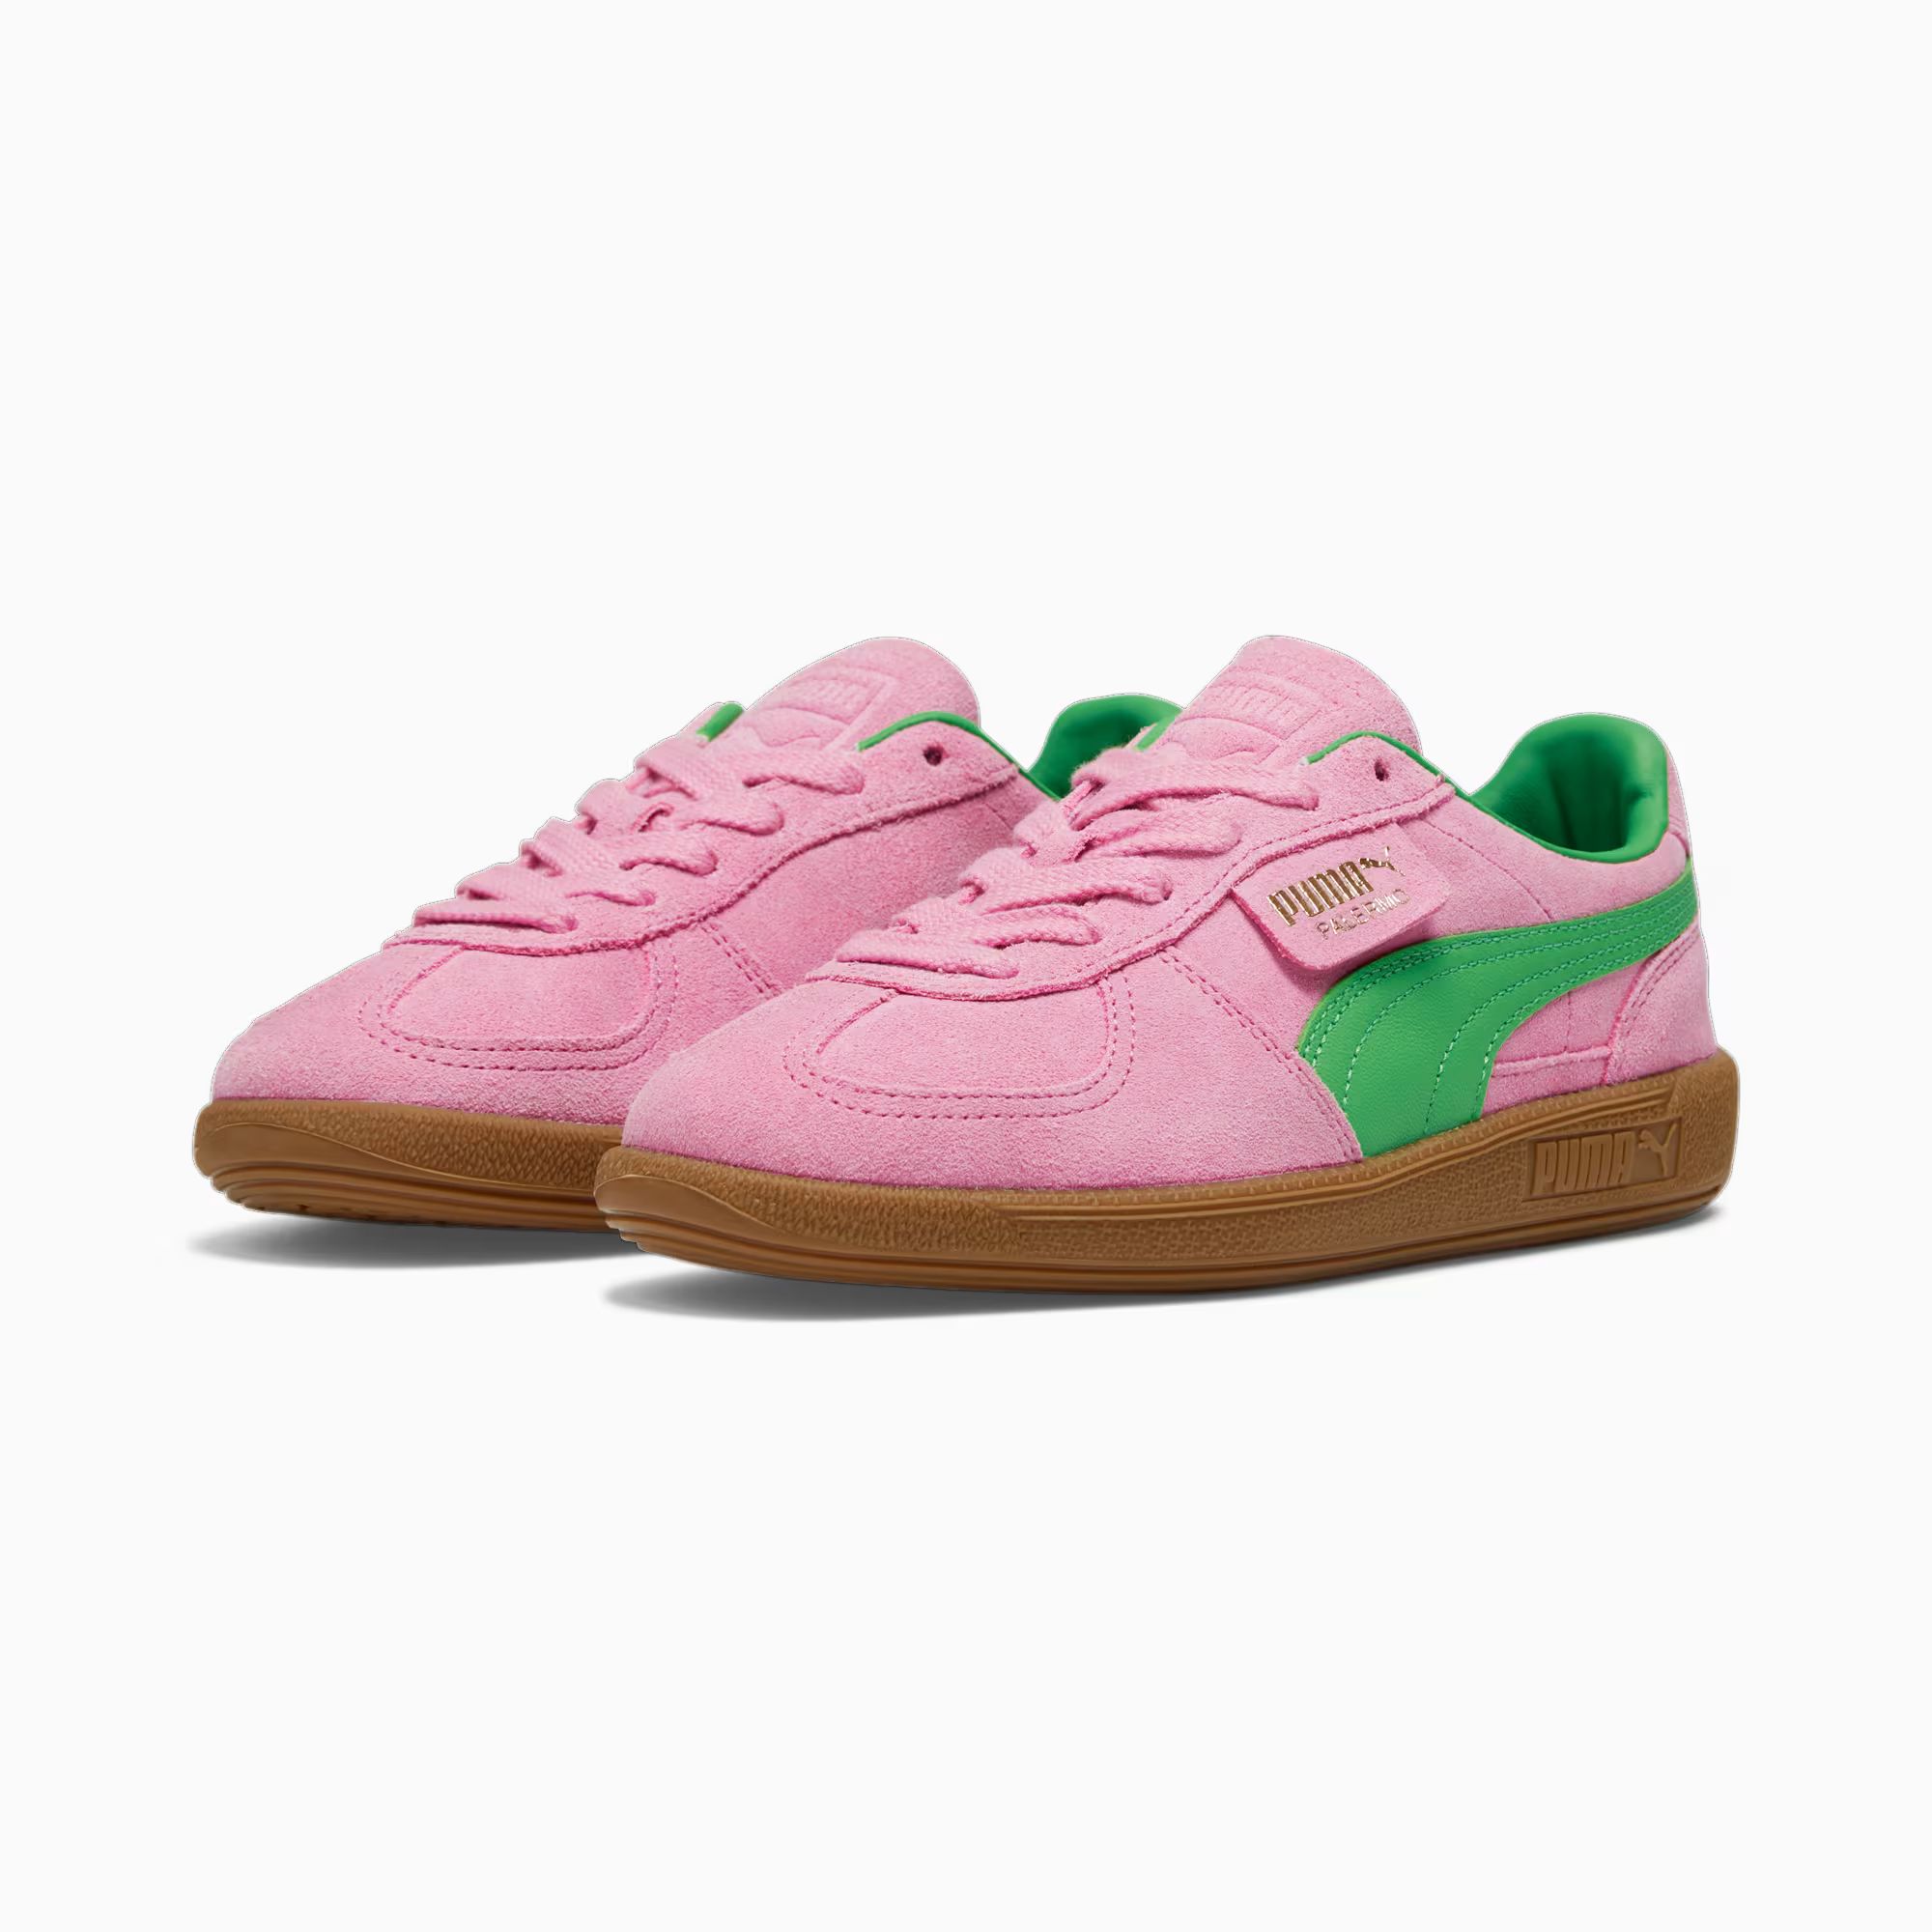 Palermo Special Women's Sneakers | PUMA US